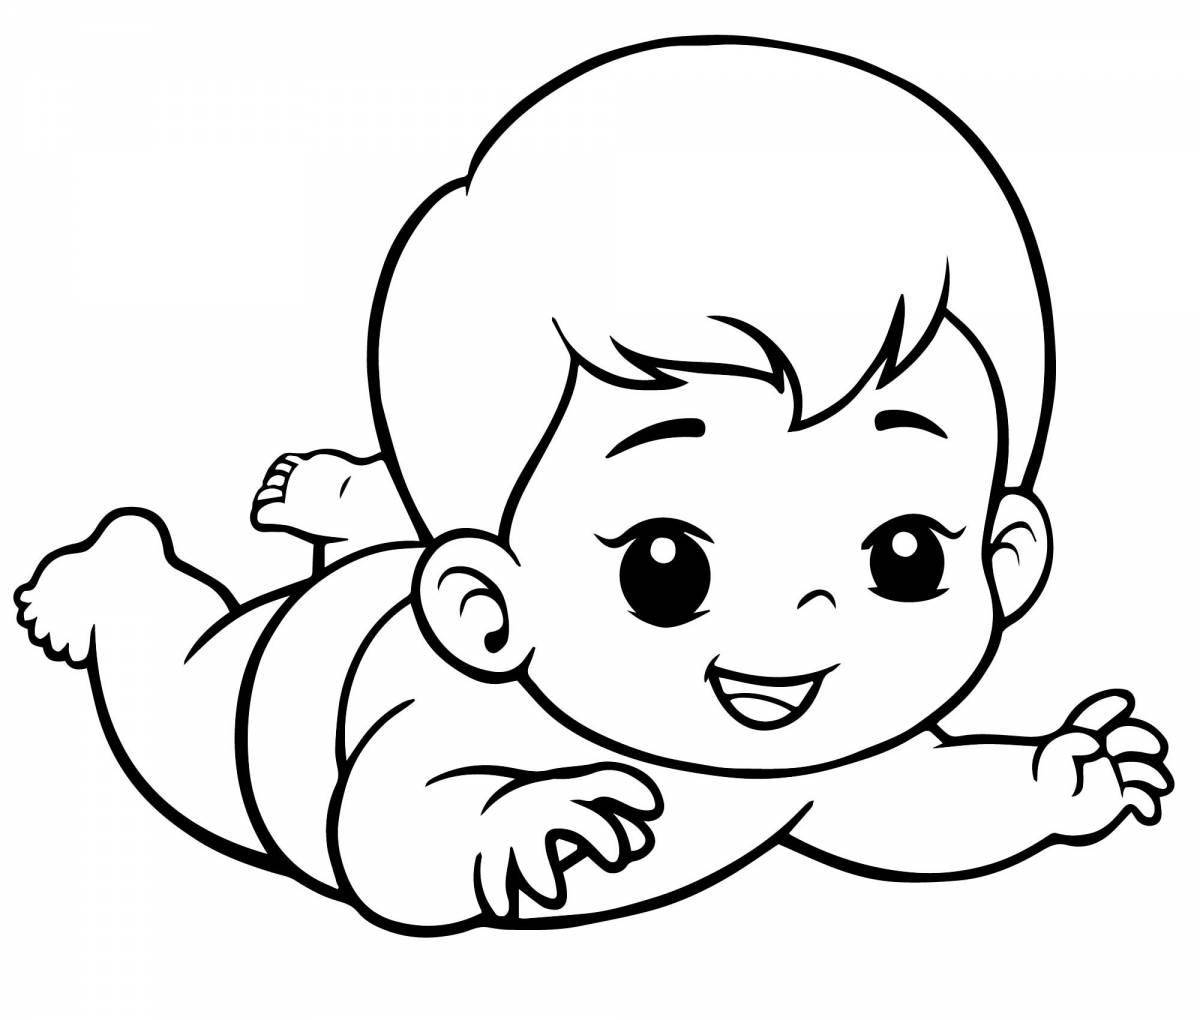 Coloring page of a sociable little child